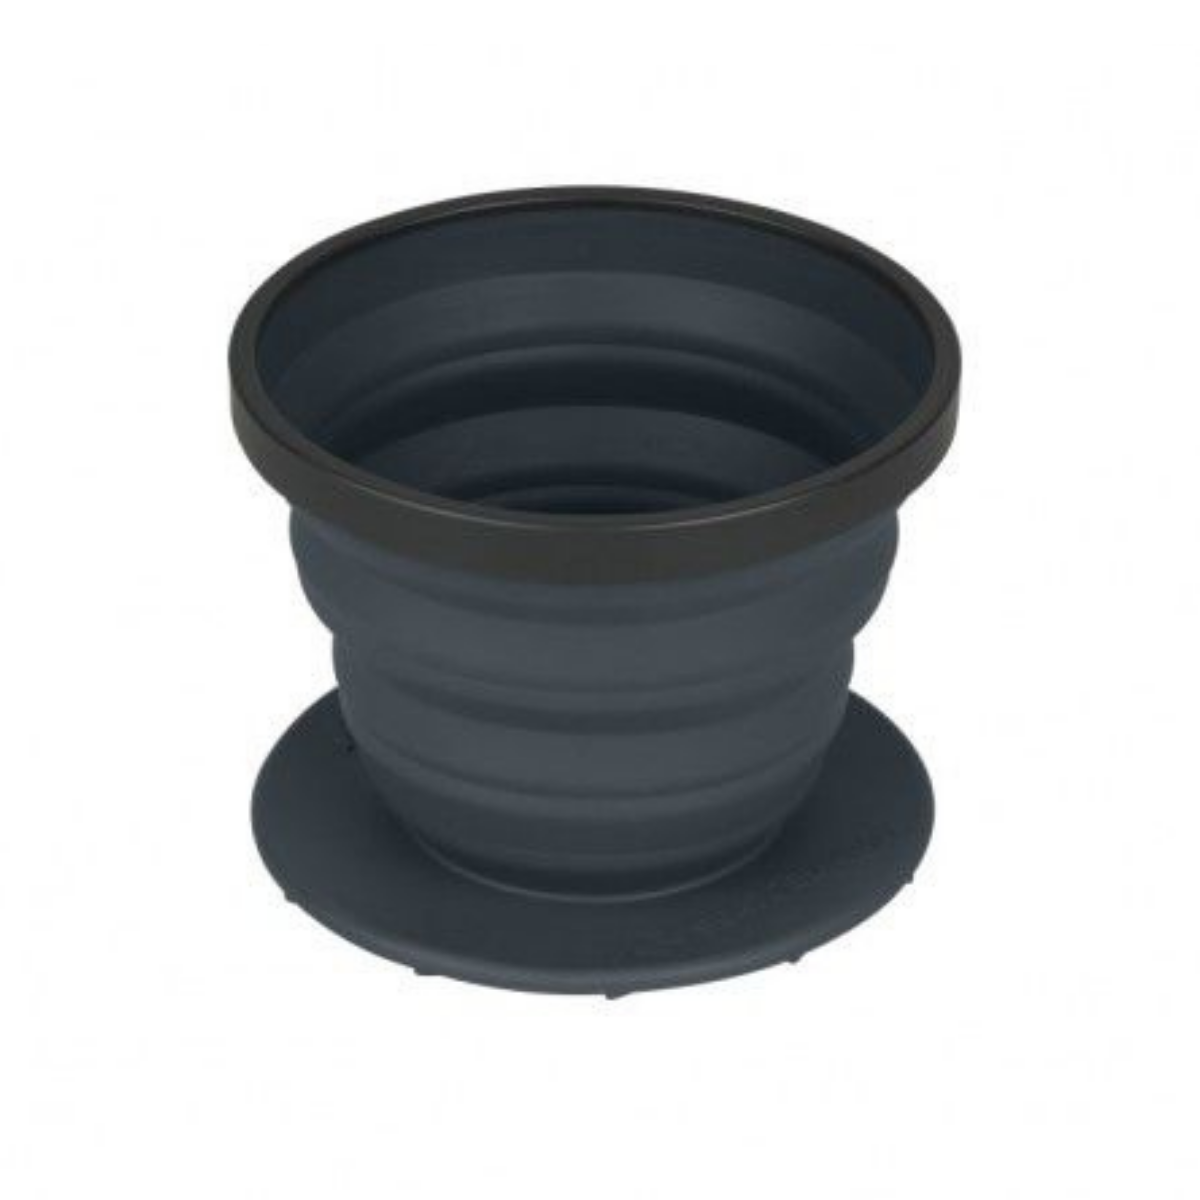 Sea To Summit X-Brew Coffee Dripper - Collapsible cup